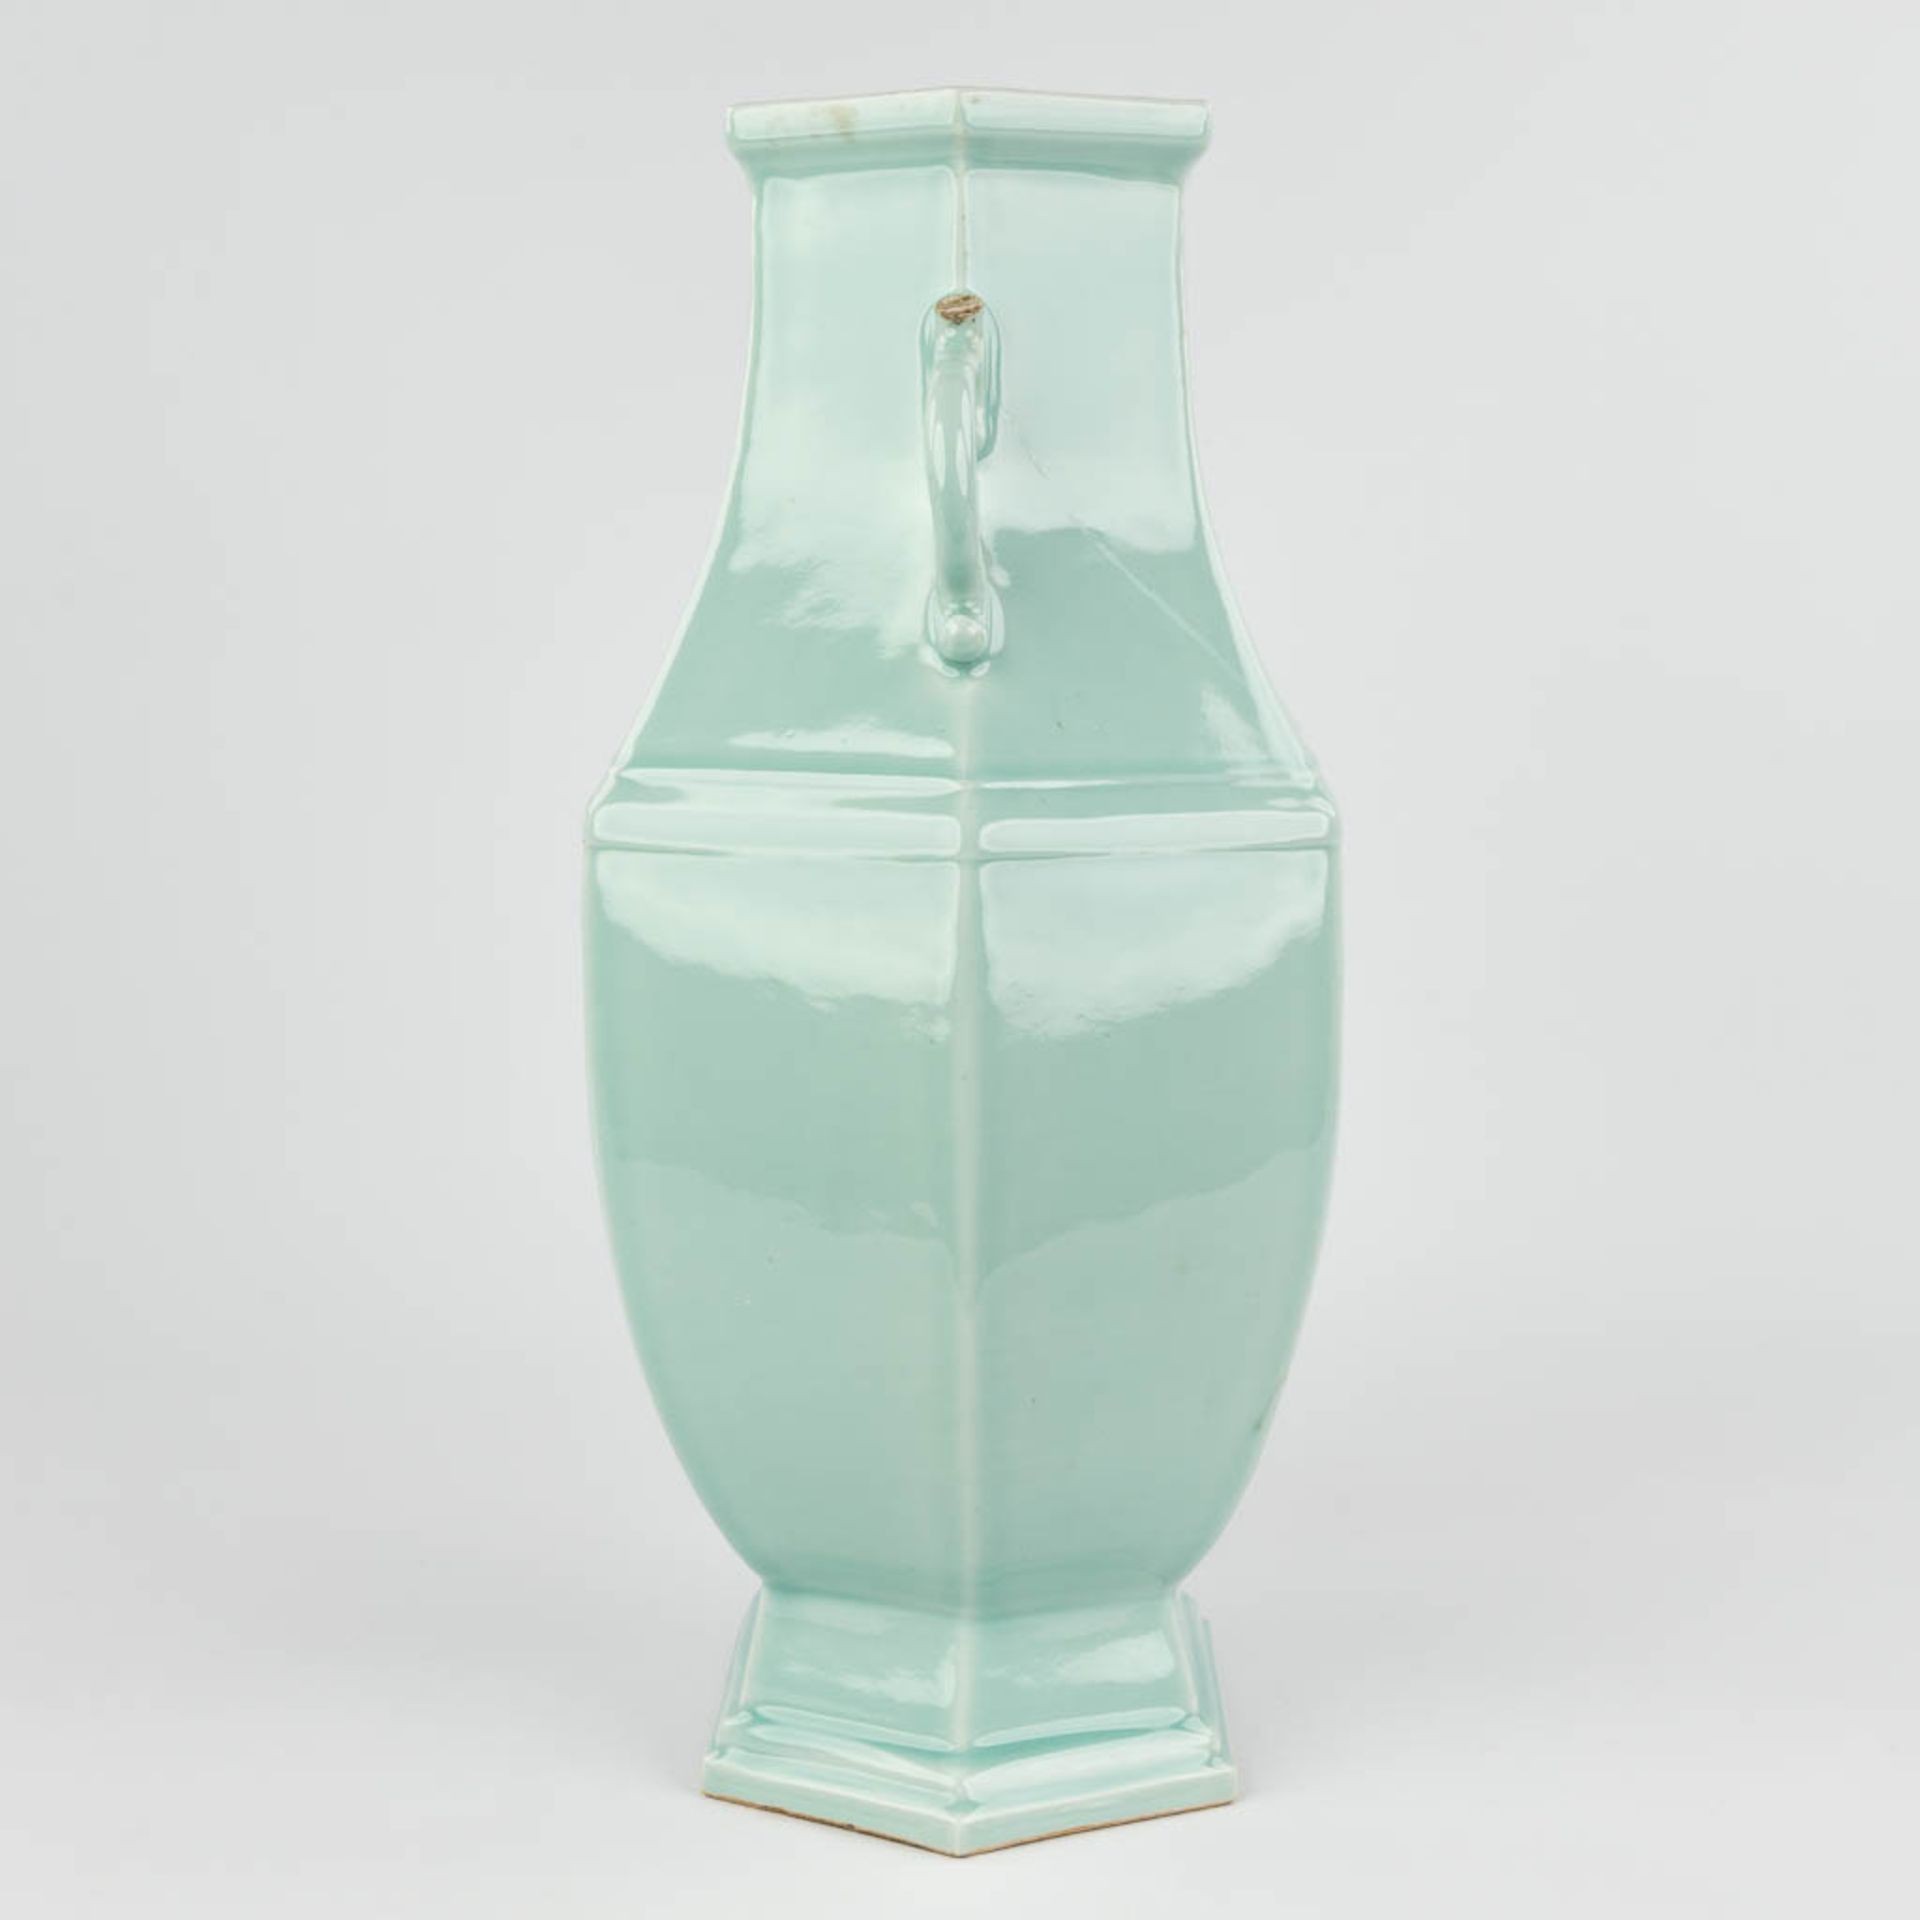 An antique Chinese celadon vase, Hexagonal, Qianlong mark and period. 18th C. (L:20 x W:26 x H:47 cm - Image 5 of 15